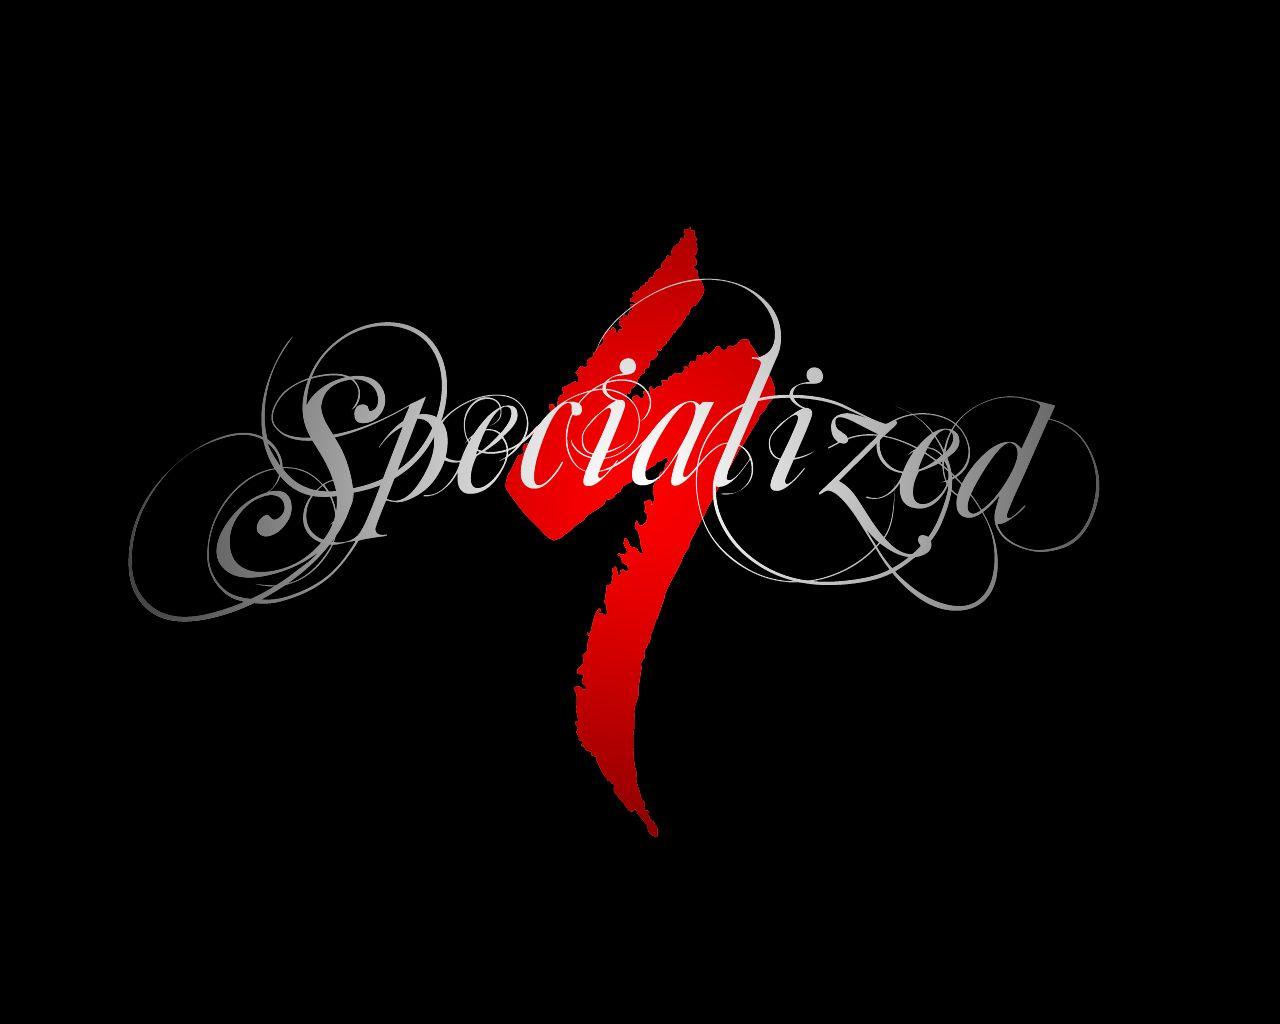 Specialized black logo wallpaper for PC